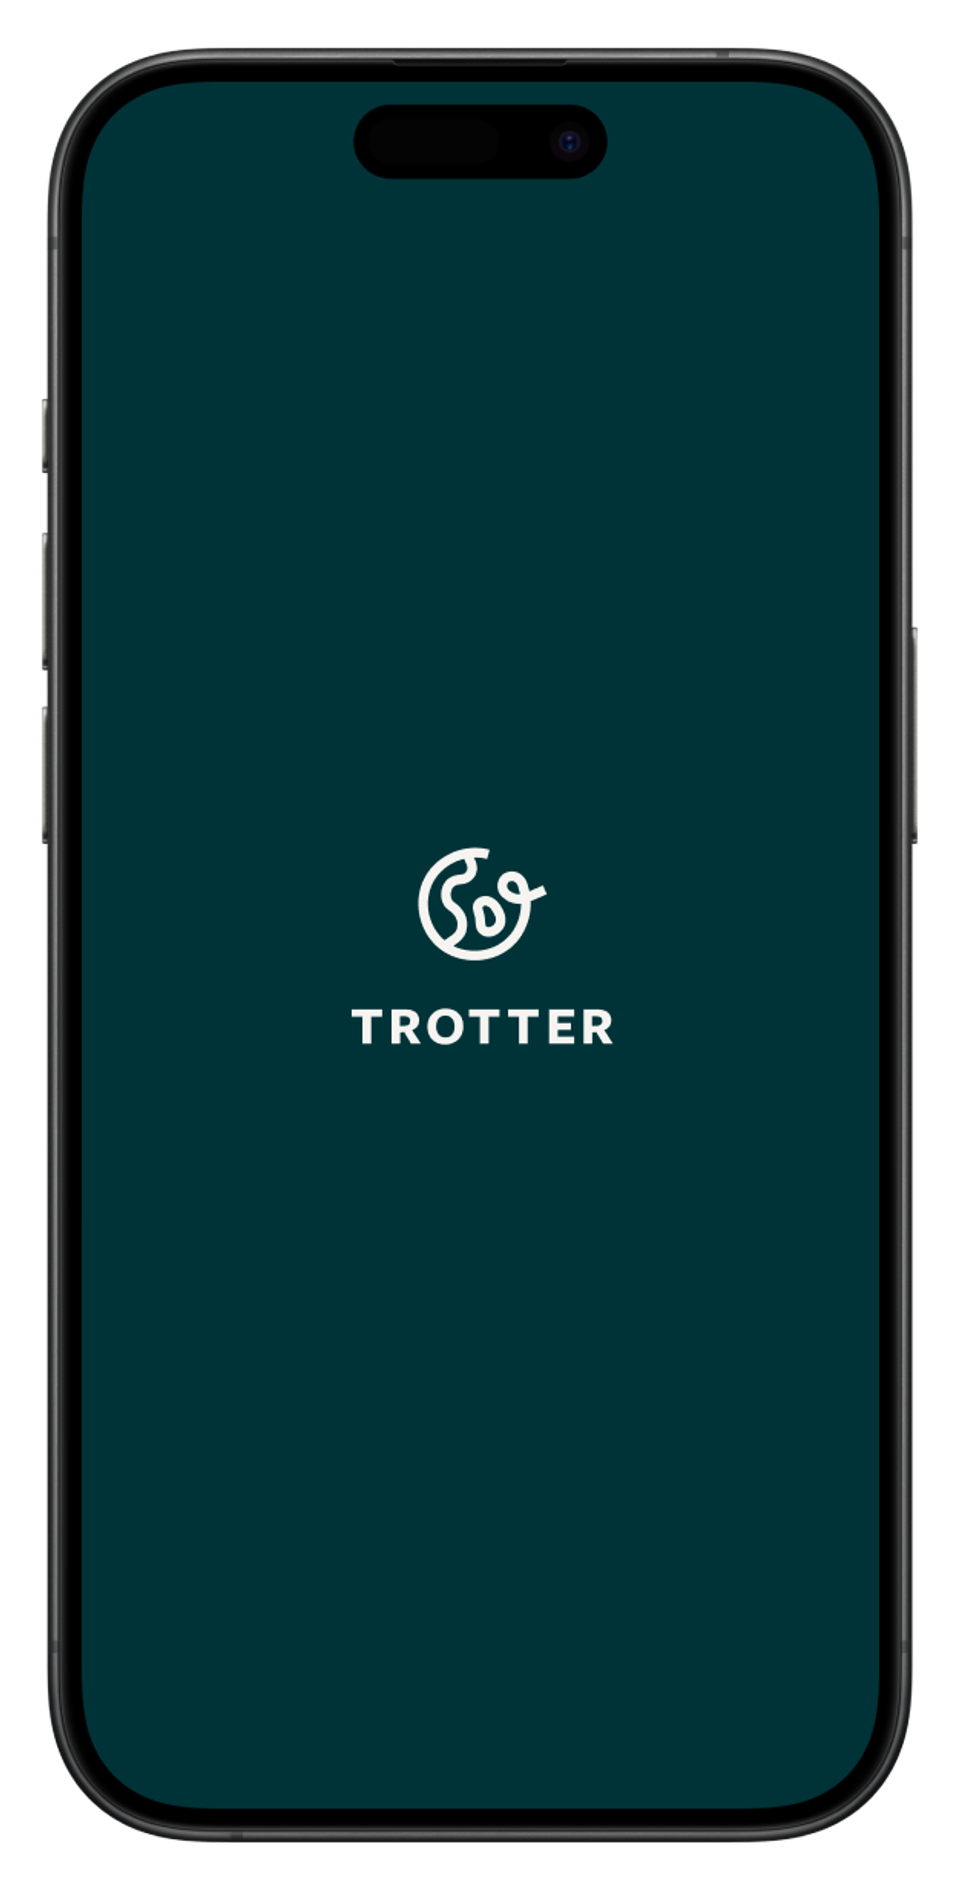 Trotter App Home Screen